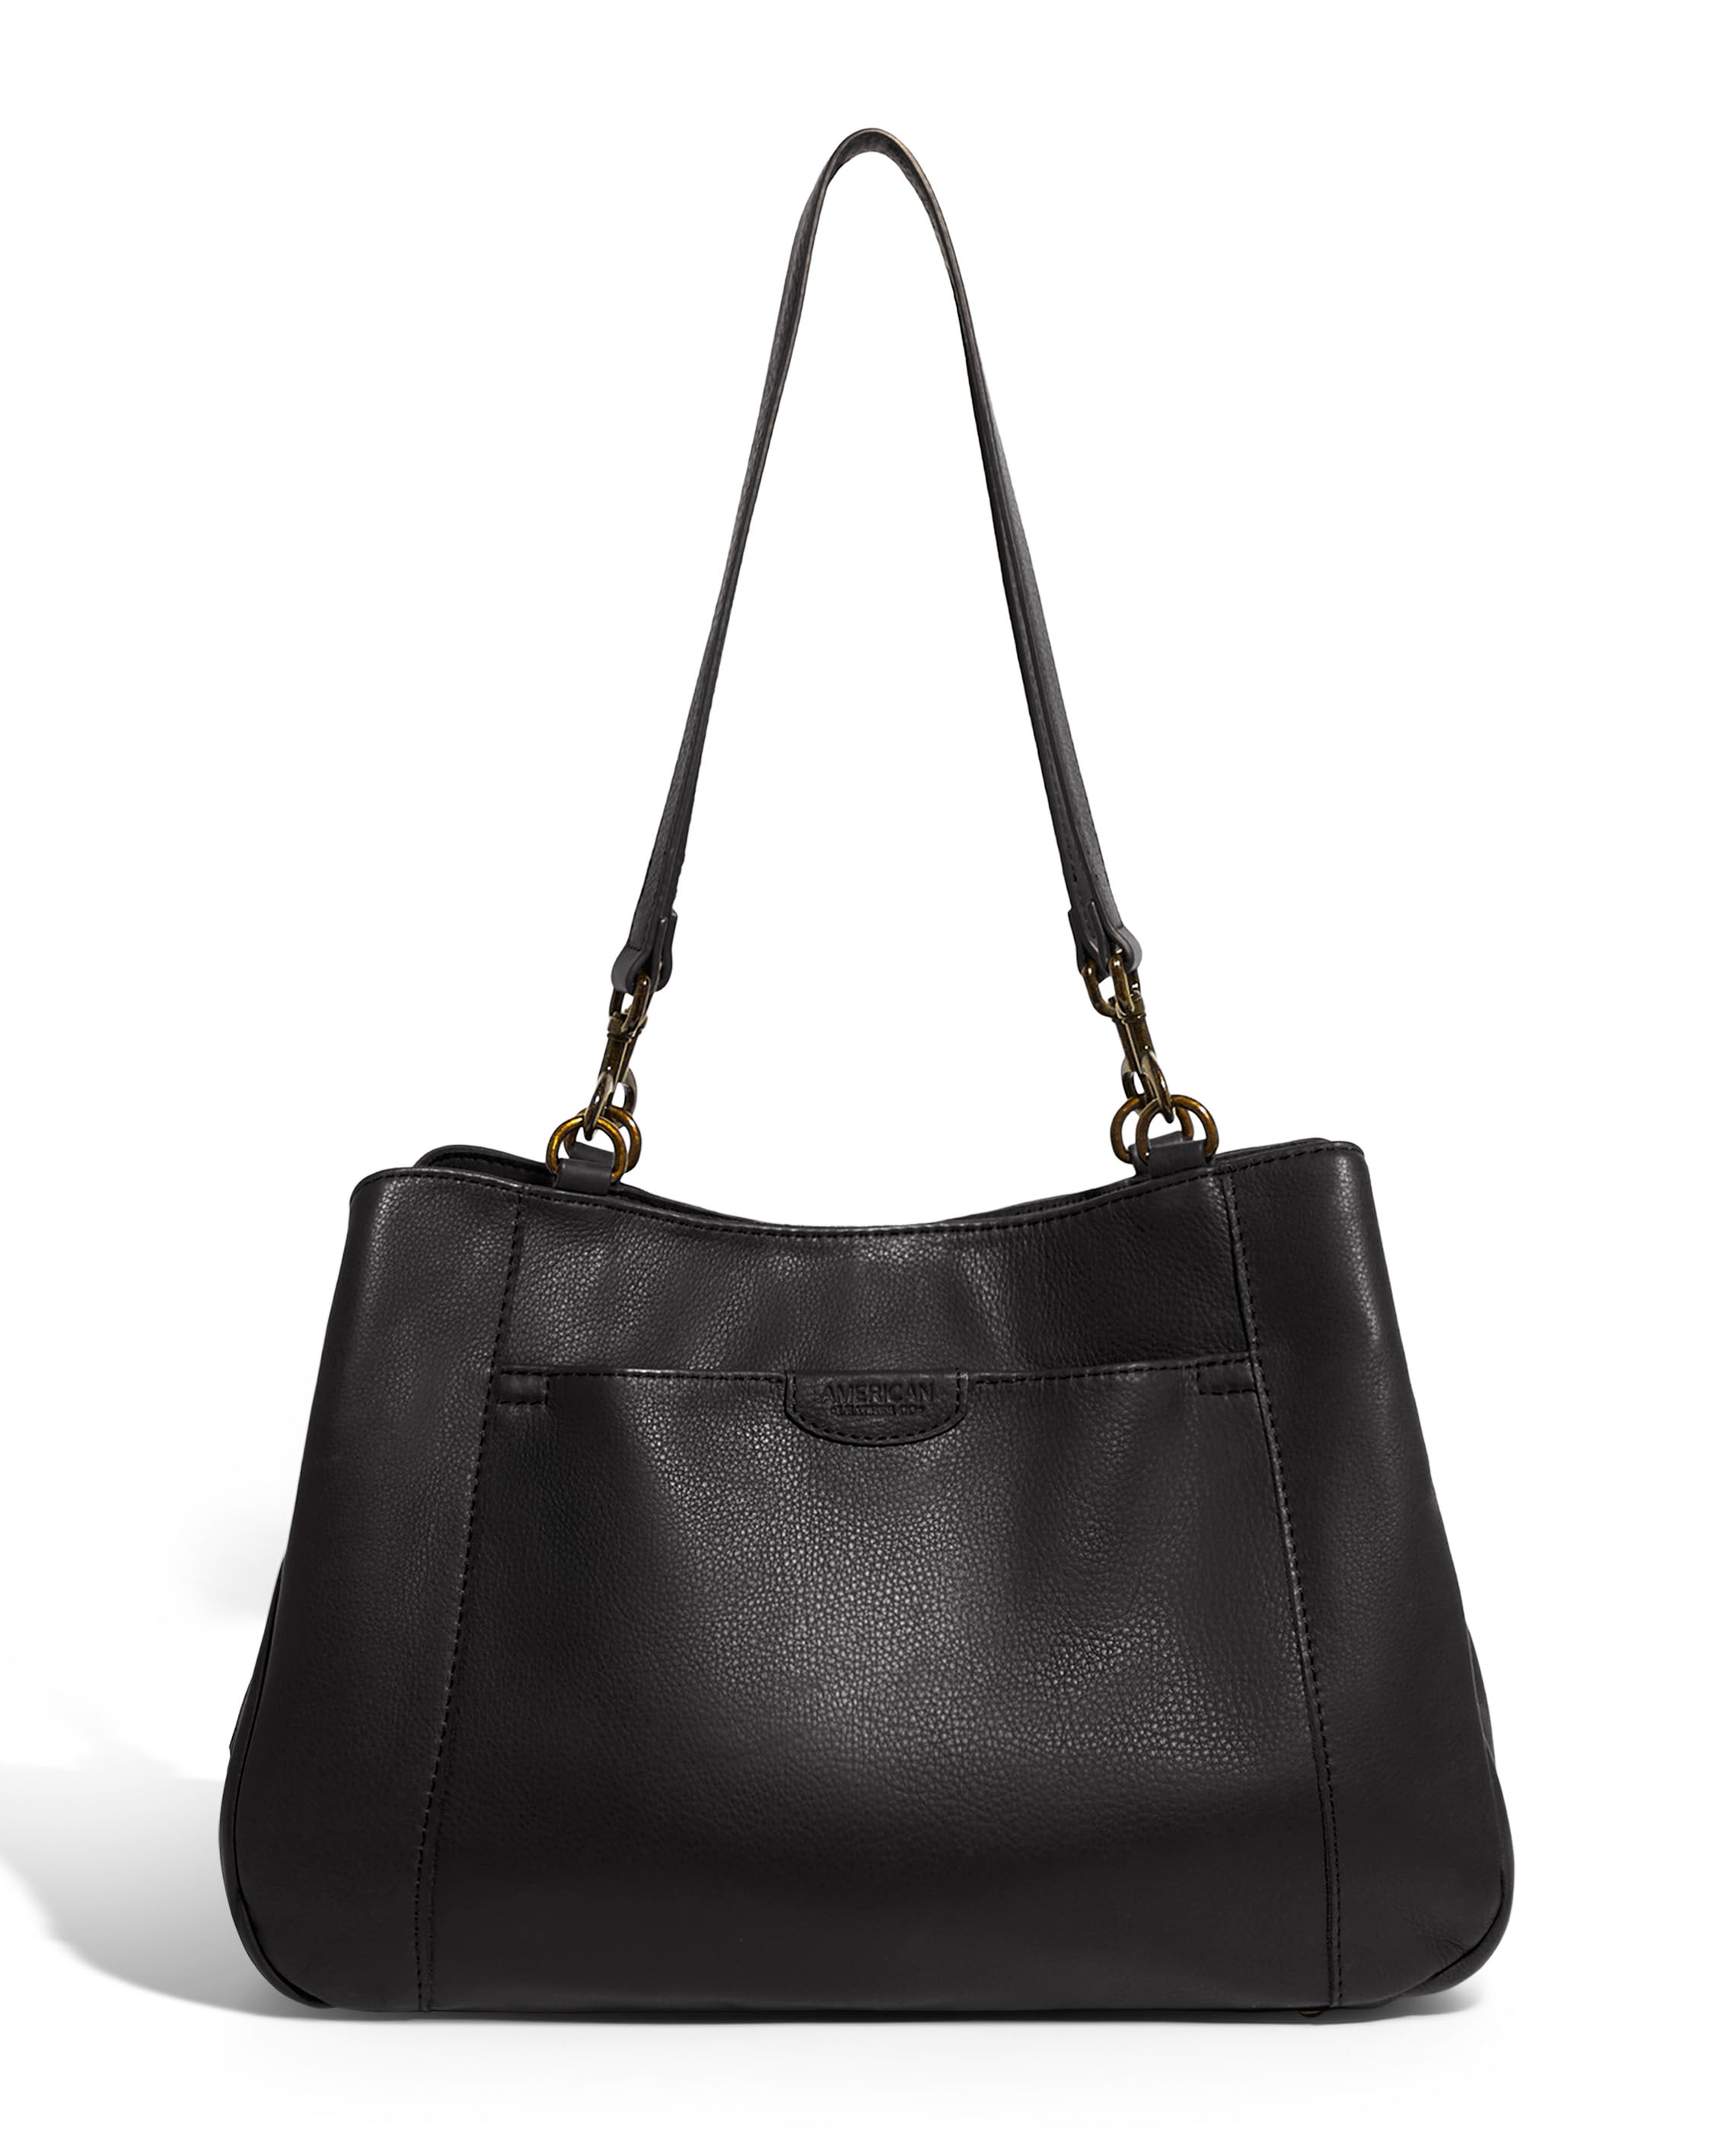 Austin East/West Satchel in Black | American Leather Co.